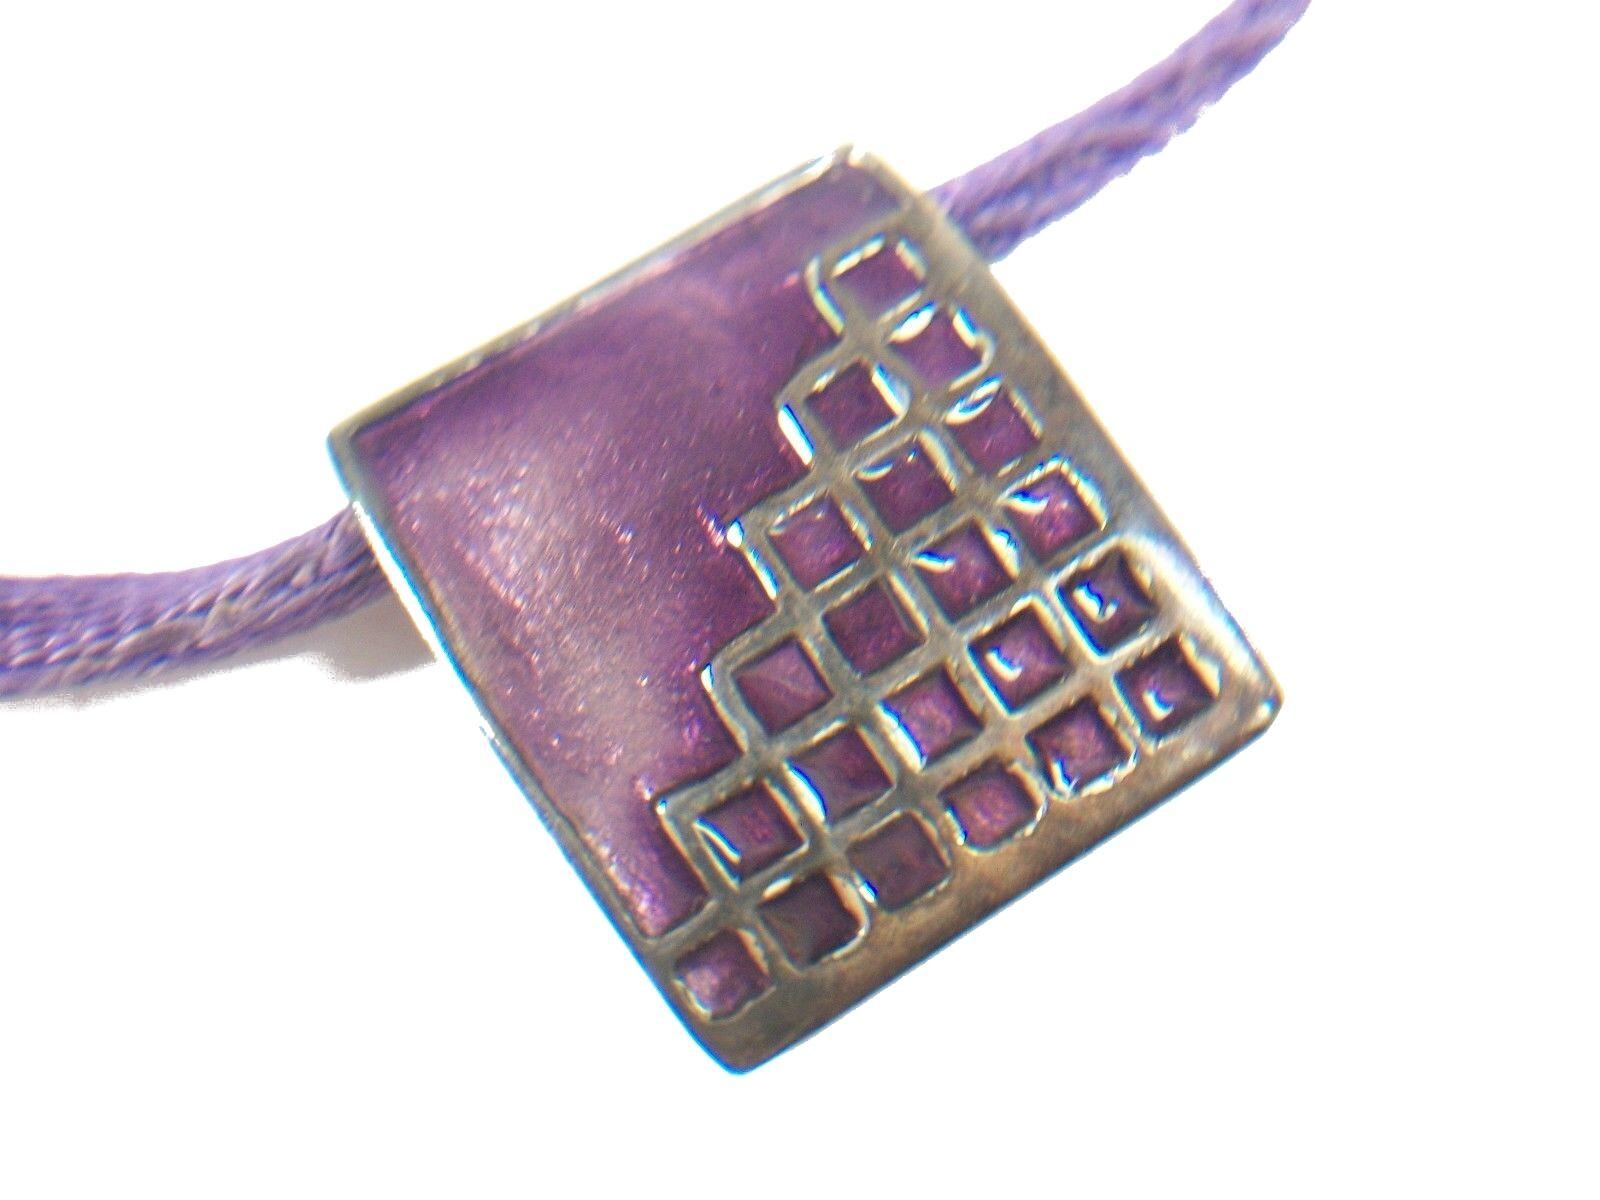 KREISS - Vintage modernist style sterling silver and violet enamel pendant on satin rope necklace - marked 925 (sterling silver) - sterling silver clasp - signed and dated on the back - circa 1972.

Excellent vintage condition - no loss - no damage